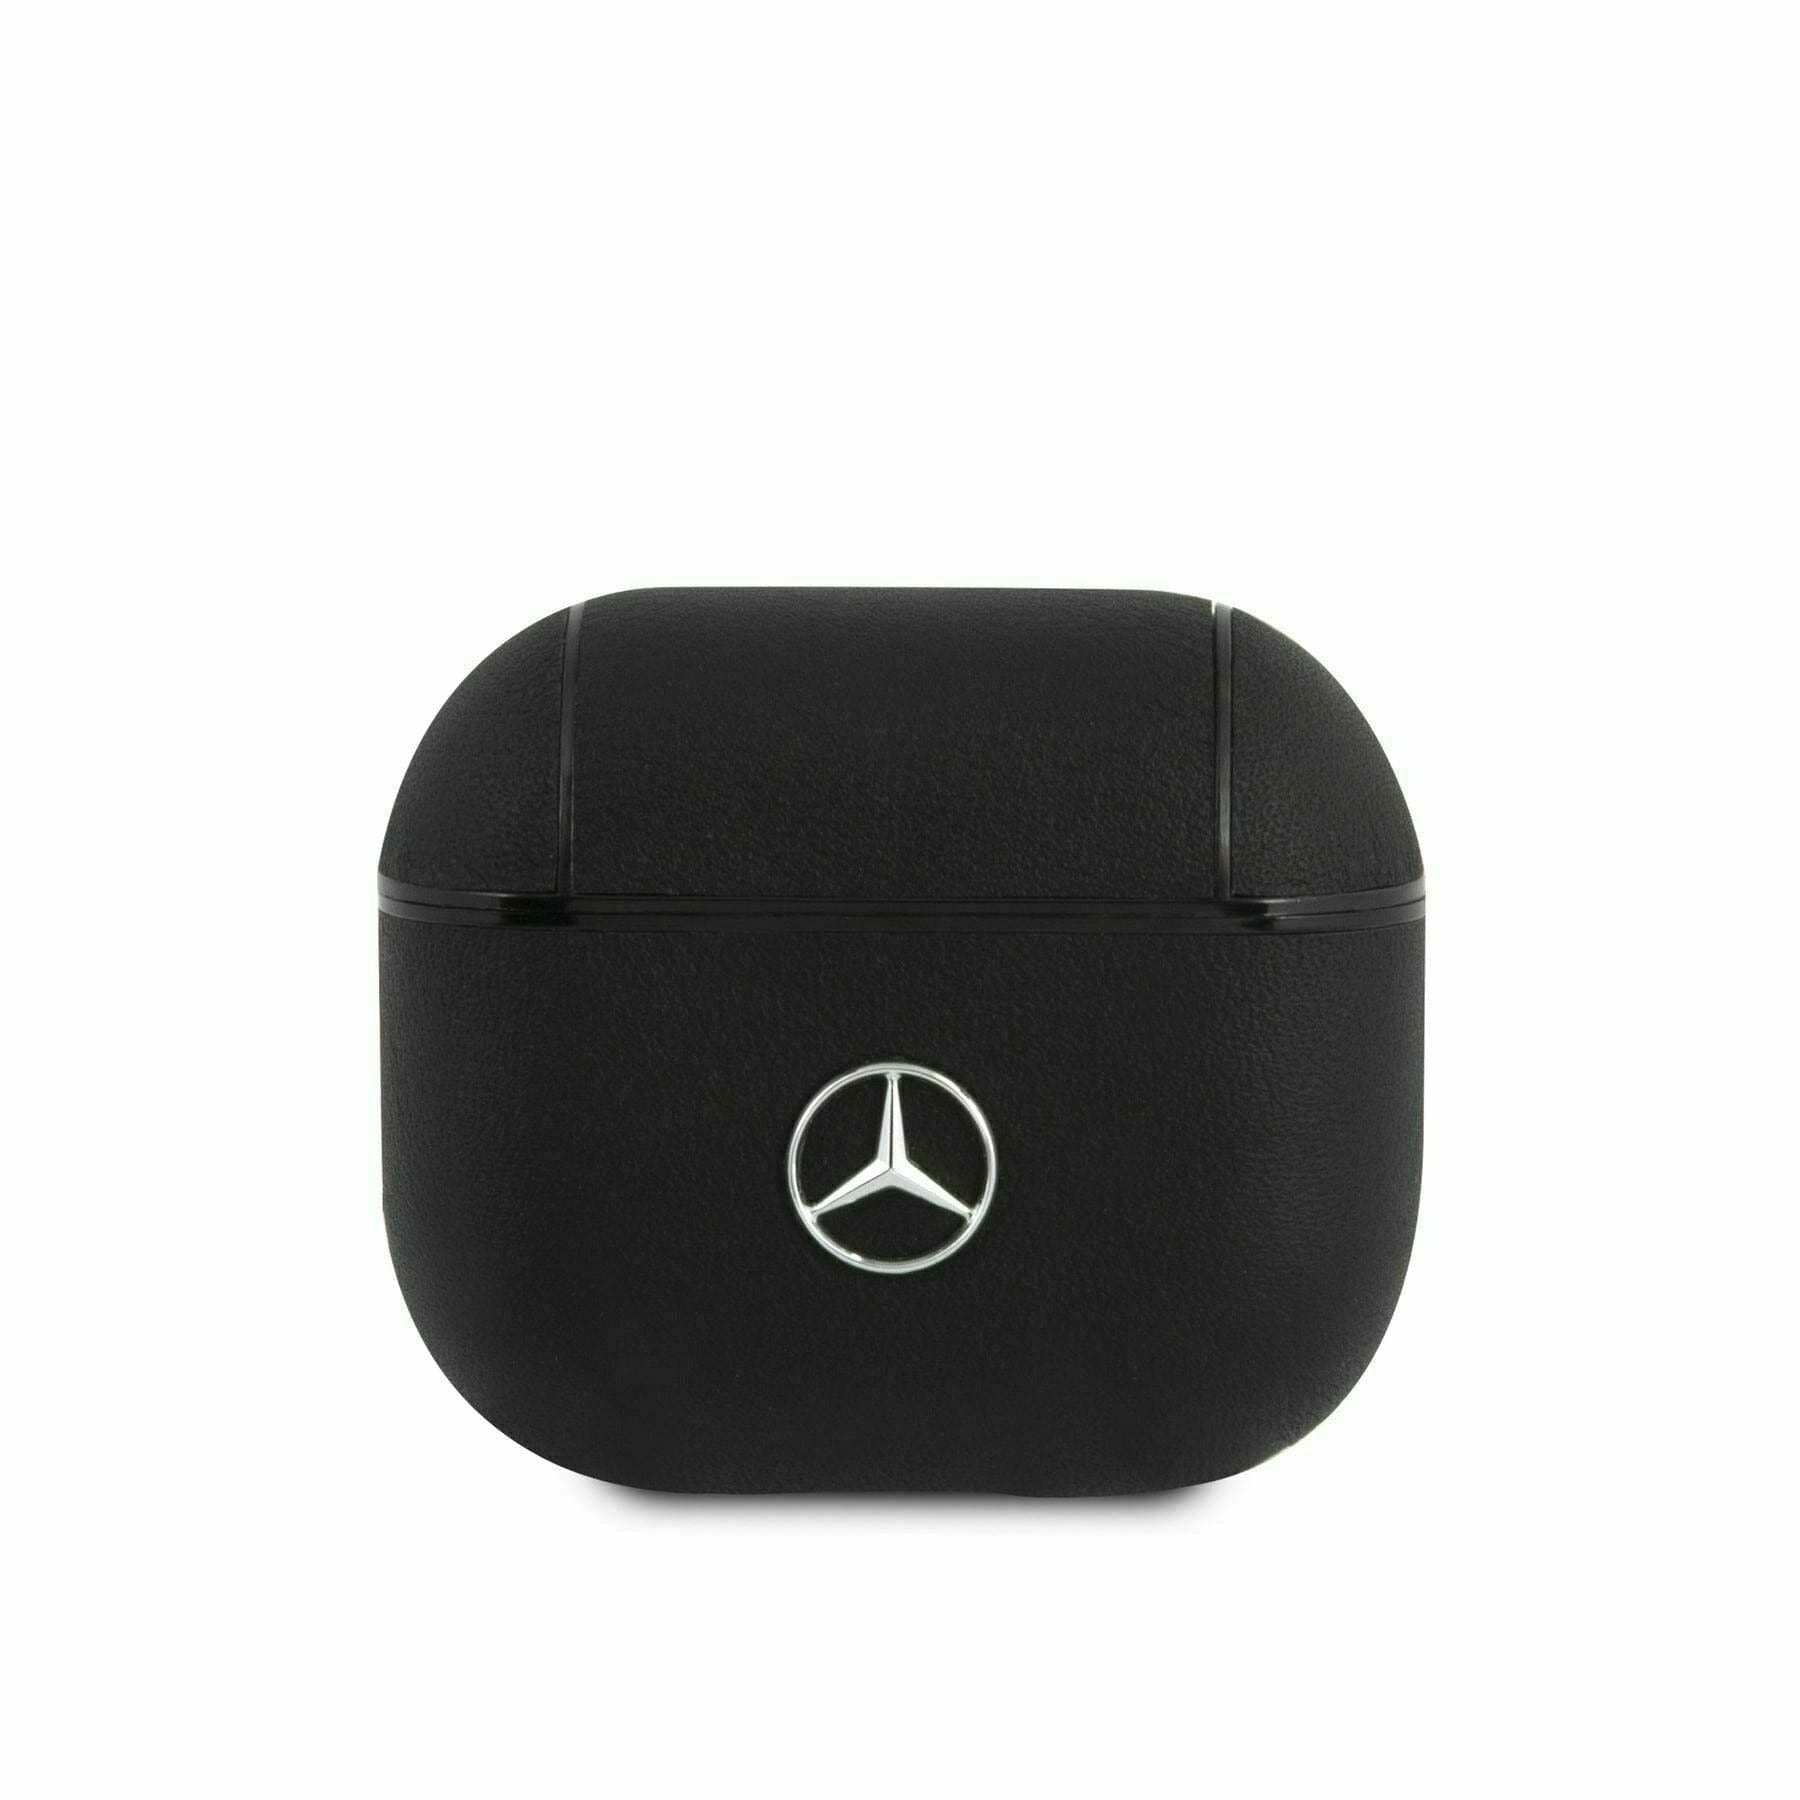 Mercedes-AMG Petronas Black leather Airpod Cover- Airpod 1/2/Pro/3